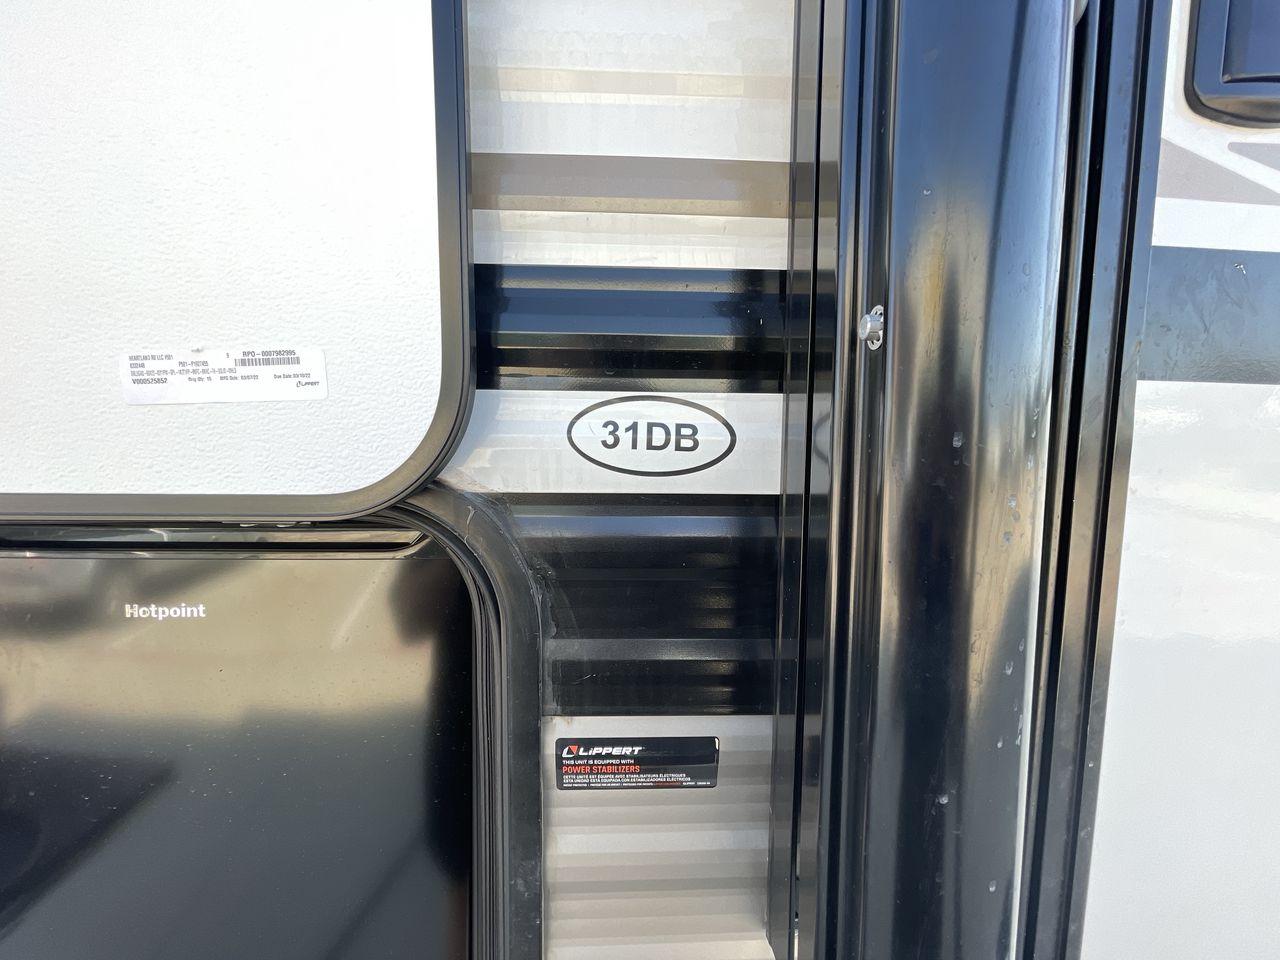 2022 HEARTLAND TRAIL RUNNER 31DB (5SFEB3728NE) , Length: 36.92 ft. | Dry Weight: 7,040 lbs. | Gross Weight: 9,642 lbs. | Slides: 1 transmission, located at 4319 N Main St, Cleburne, TX, 76033, (817) 678-5133, 32.385960, -97.391212 - Discover extra features that contribute to making this RV an ideal investment. (1) It features like a designated pet feeding station and easy-to-clean flooring, making your pet feel just as welcome as the human members of the crew. (2) The Trail Runner 31DB features a convenient pass-through st - Photo #21